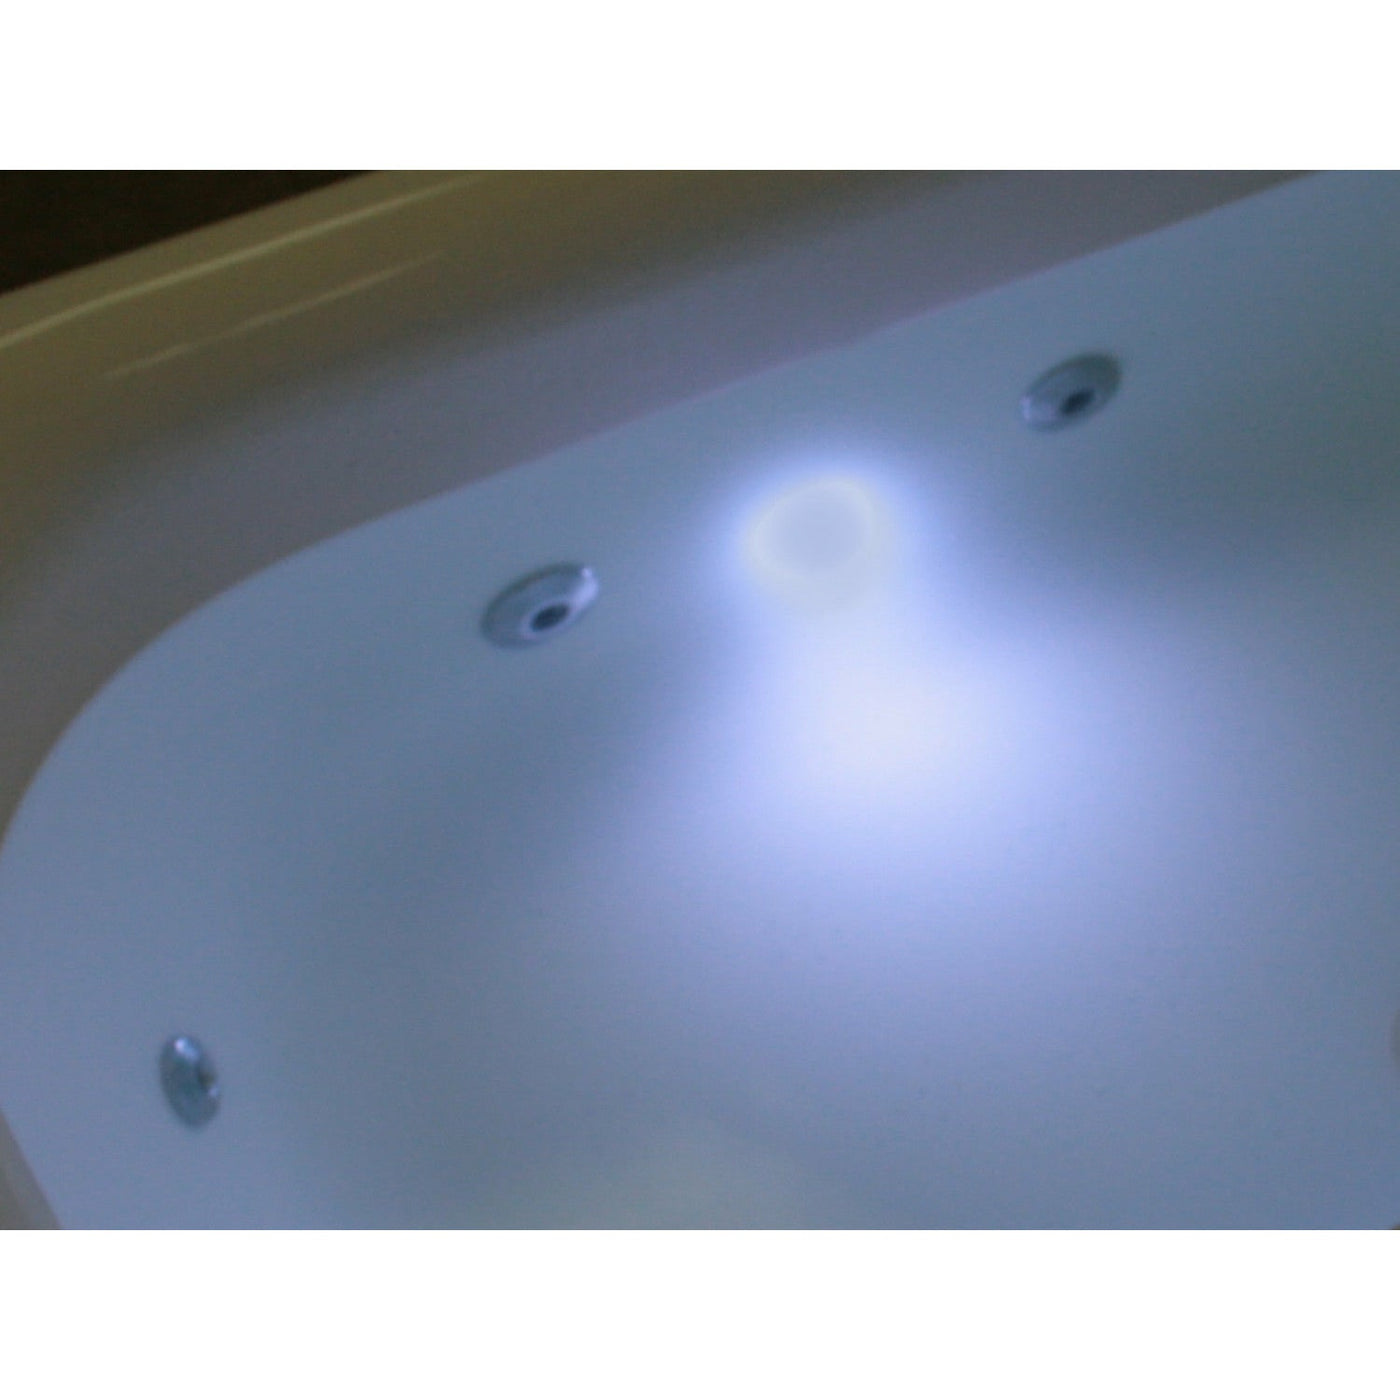 Frontline Polished Chrome Underwater Chromatherapy Lighting System for Whirlpool Baths - Letta London - 